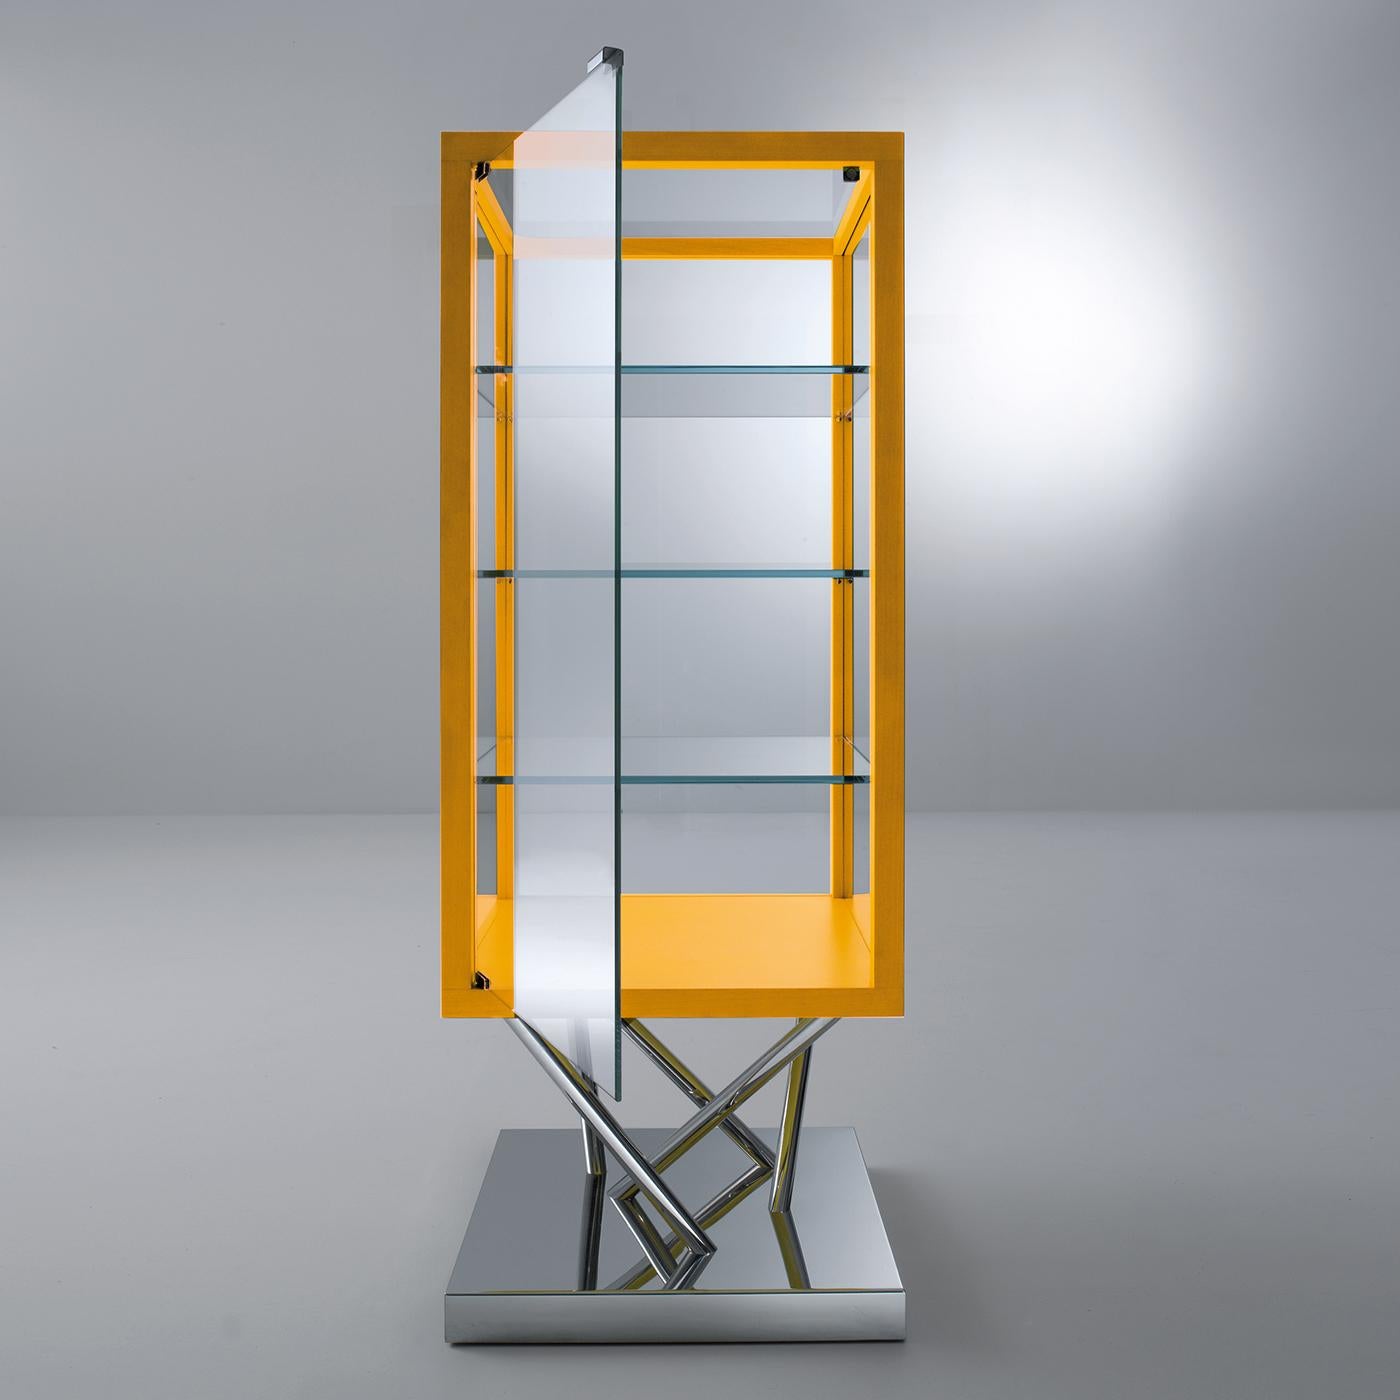 This cabinet features a polished steel base and is trimmed in yellow aniline-stained maple. It features one hinged door. Its side panels, back and top are in ultra-light glass. On request, it is also available in satin glass. SA 02 is a sculptural